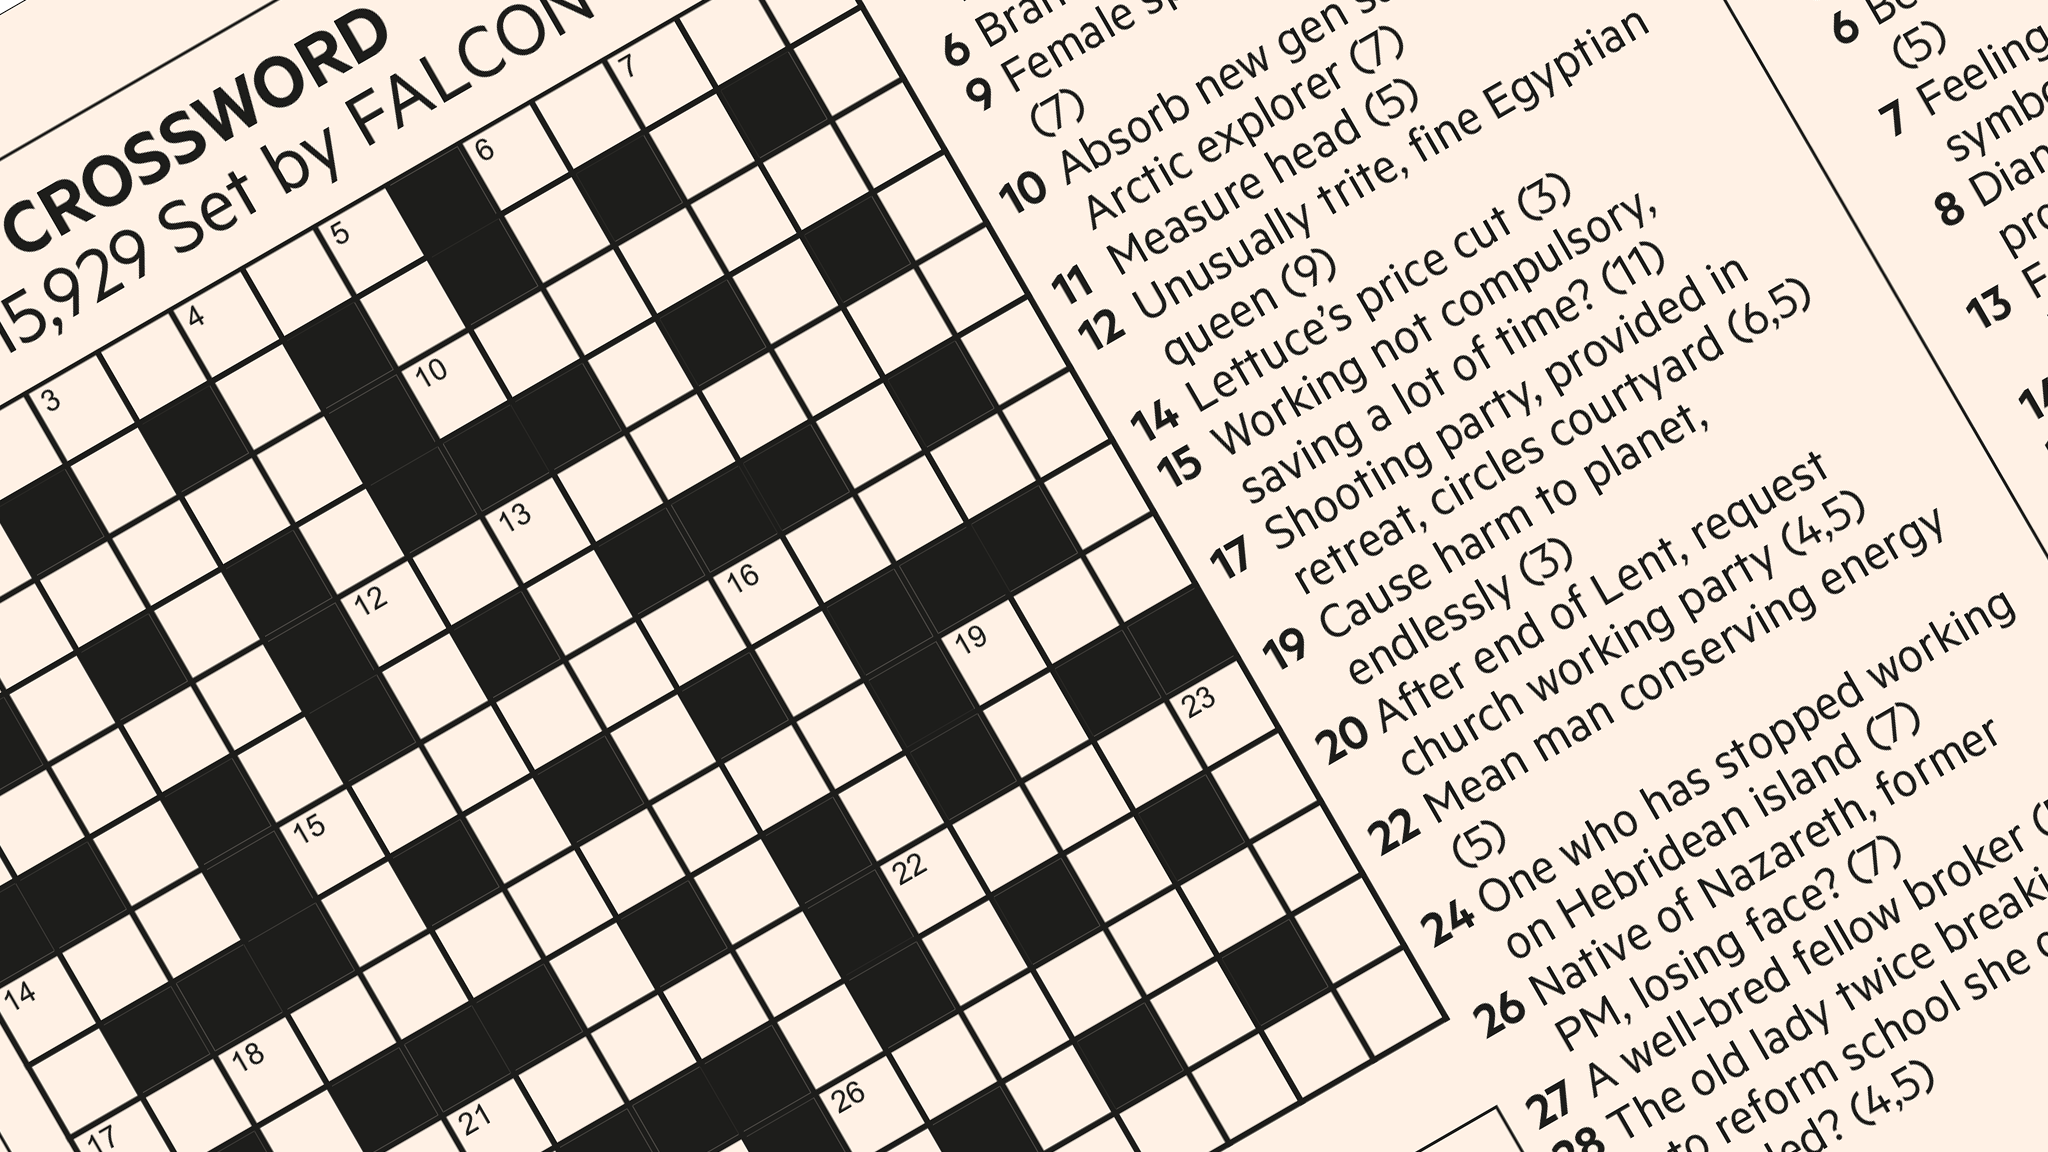 The First-Ever Cryptic Crossword Puzzle, by D.C. Maloney